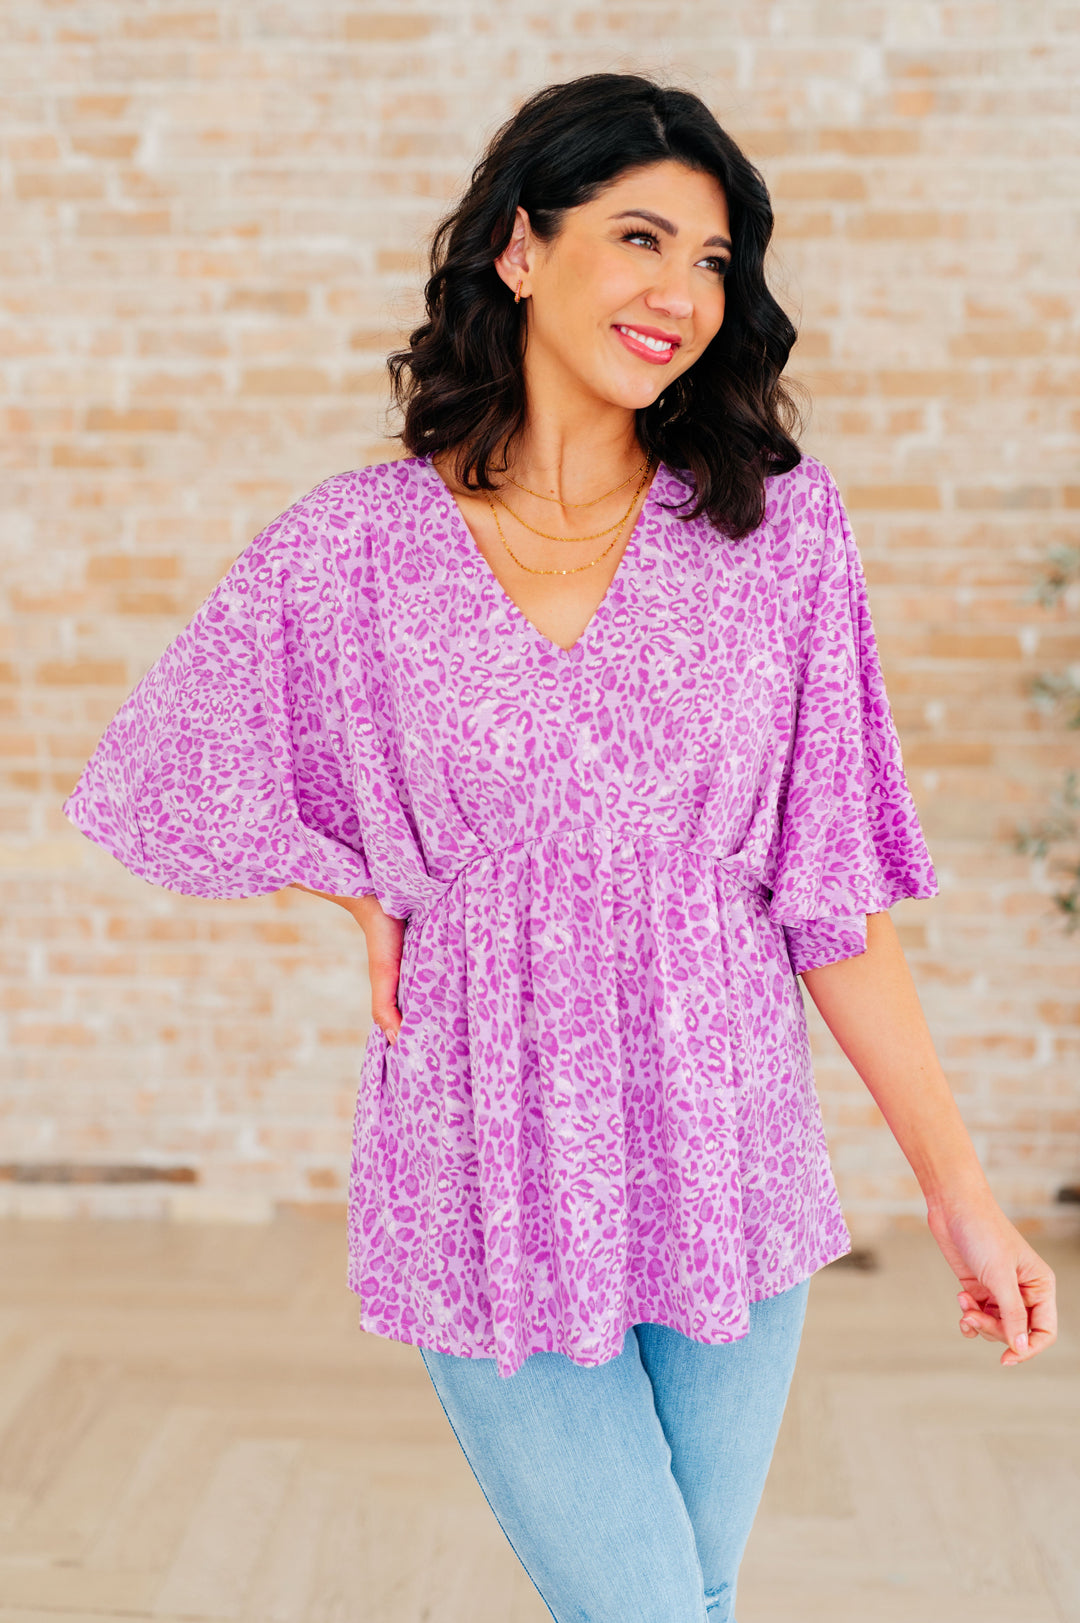 Dreamer Peplum Top in Lavender Leopard-Long Sleeve Tops-Inspired by Justeen-Women's Clothing Boutique in Chicago, Illinois